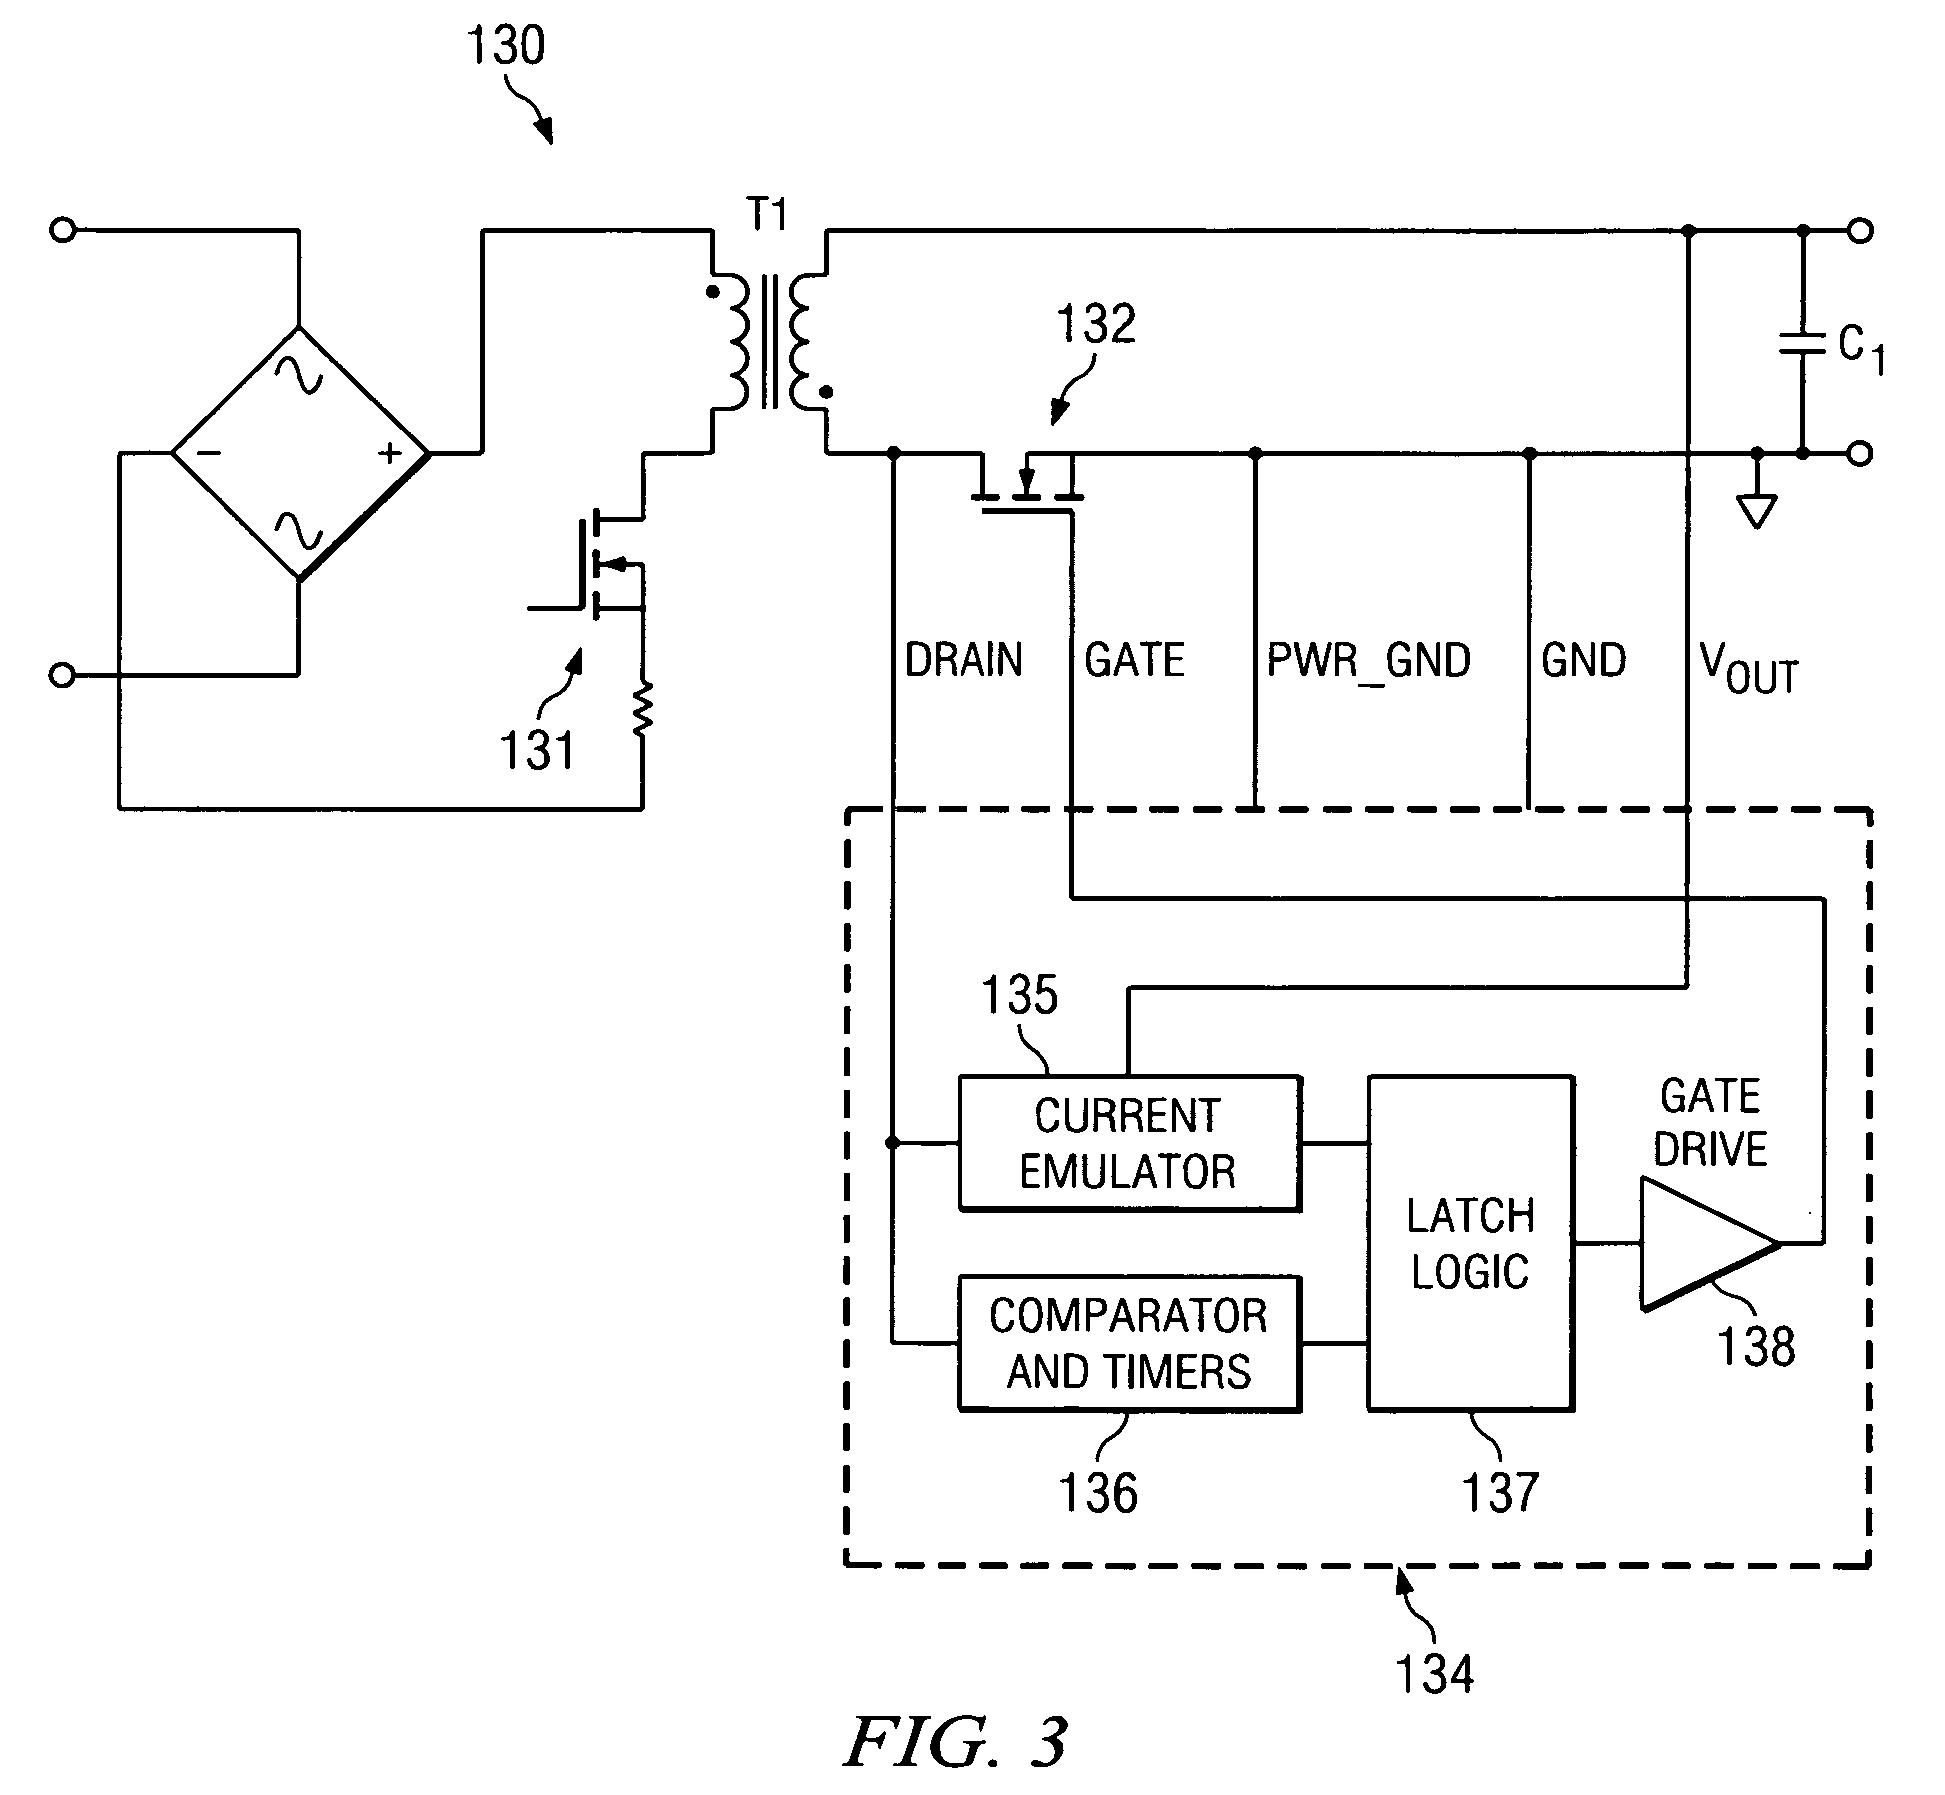 System and method for synchronous rectifier drive that enables converters to operate in transition and discontinuous mode